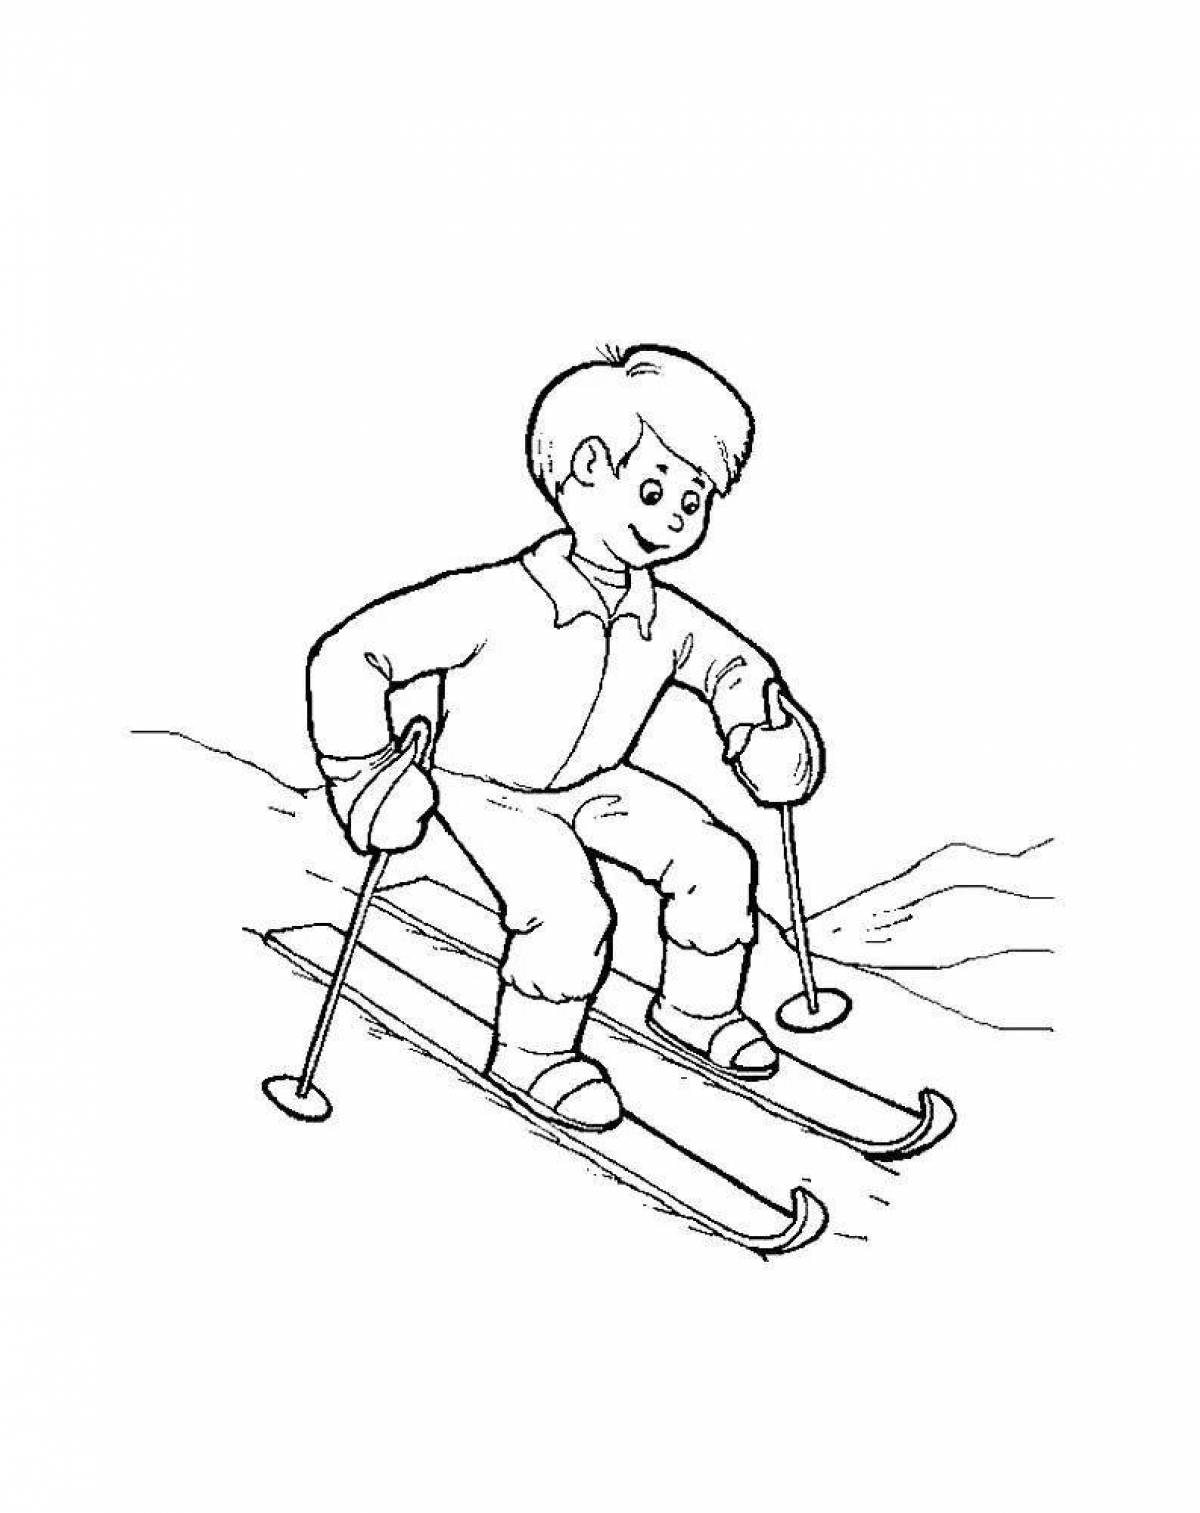 Coloring page confident senior skier